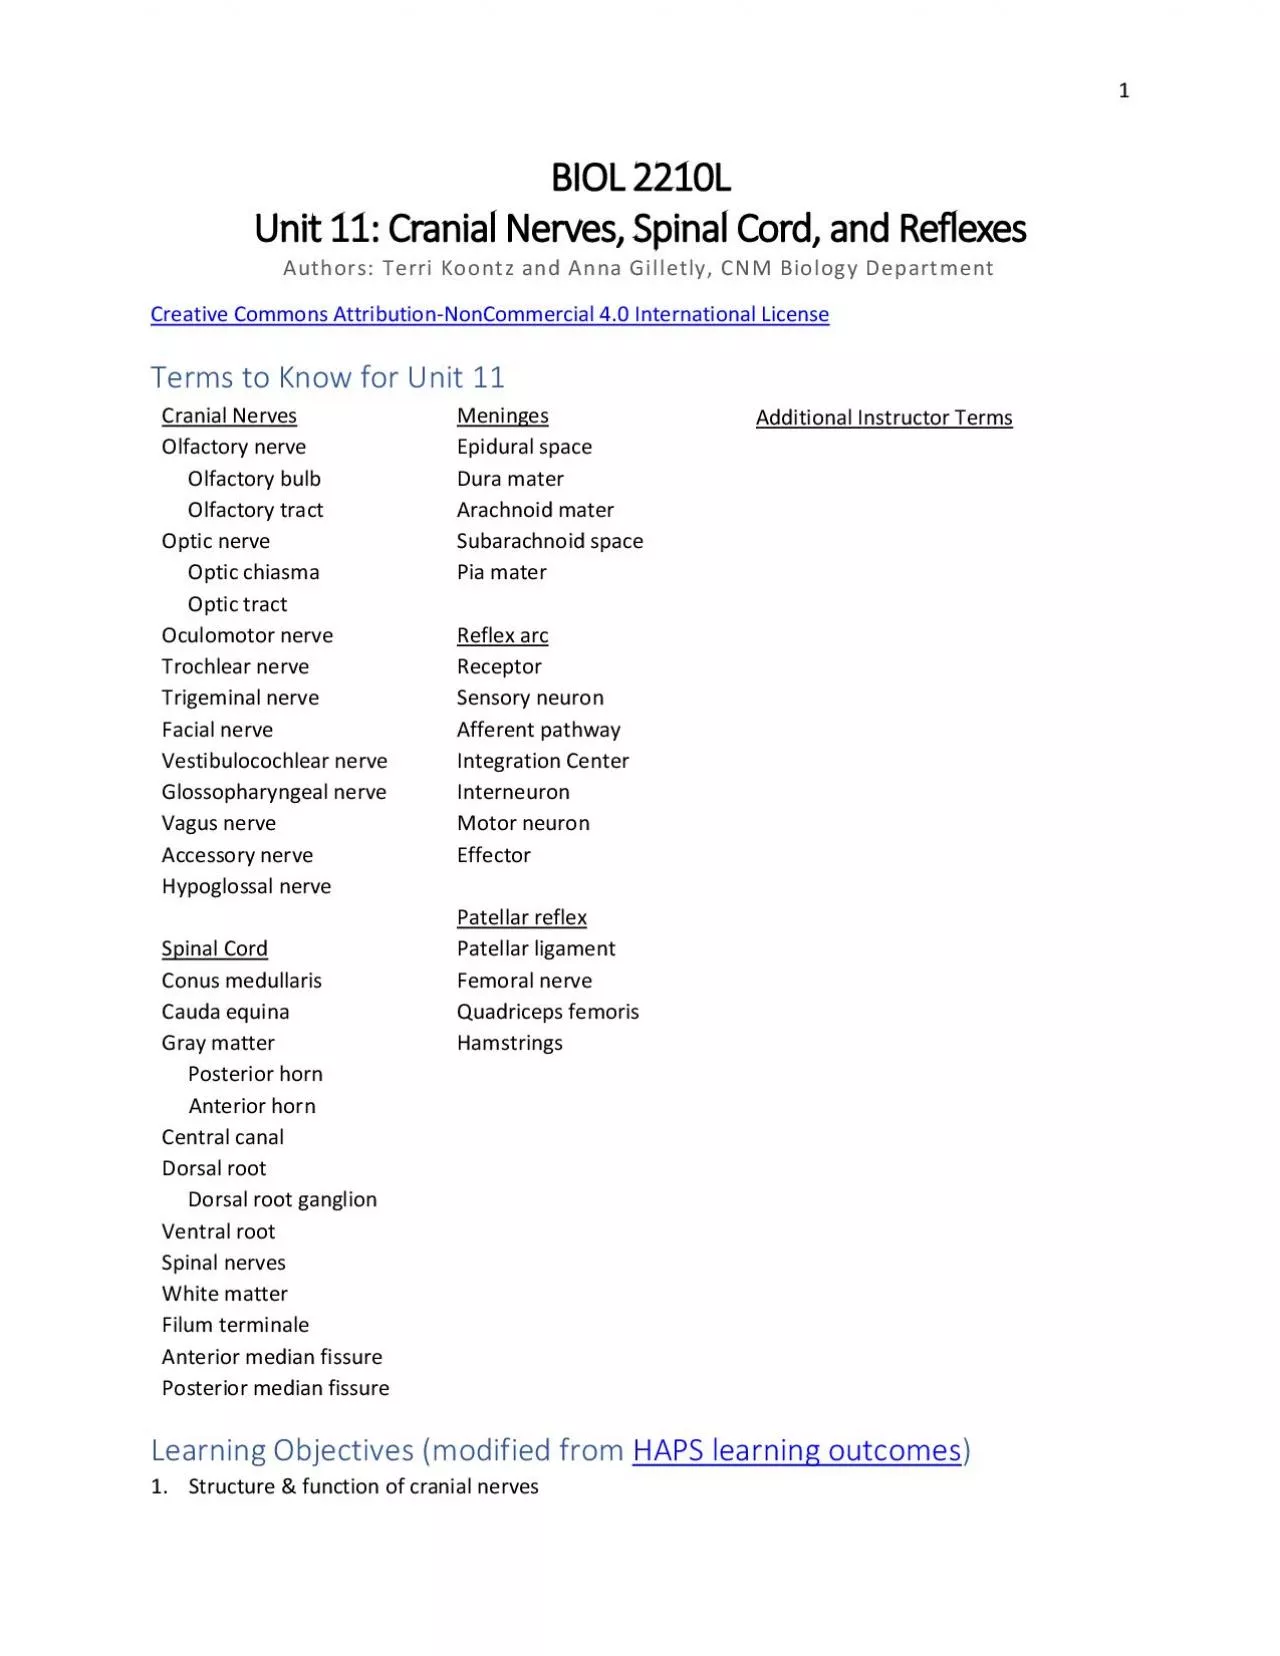 Cranial Nerves Spinal Cord and Reflexes